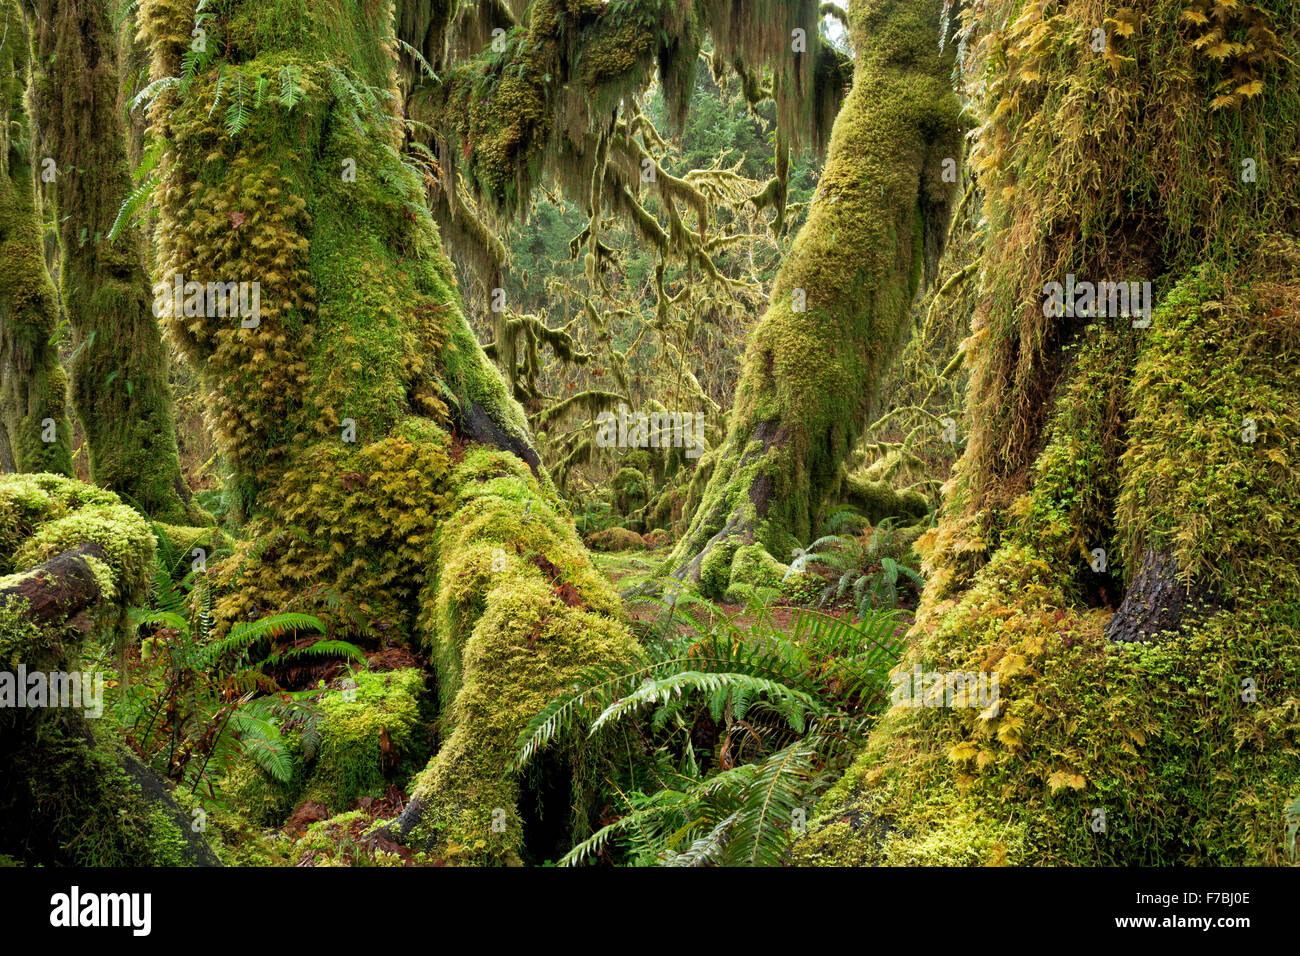 Moss covered trees and fern covered forest floor in the Hall of Mosses, a temperate rain forest environment, in Hoh River Valley Stock Photo